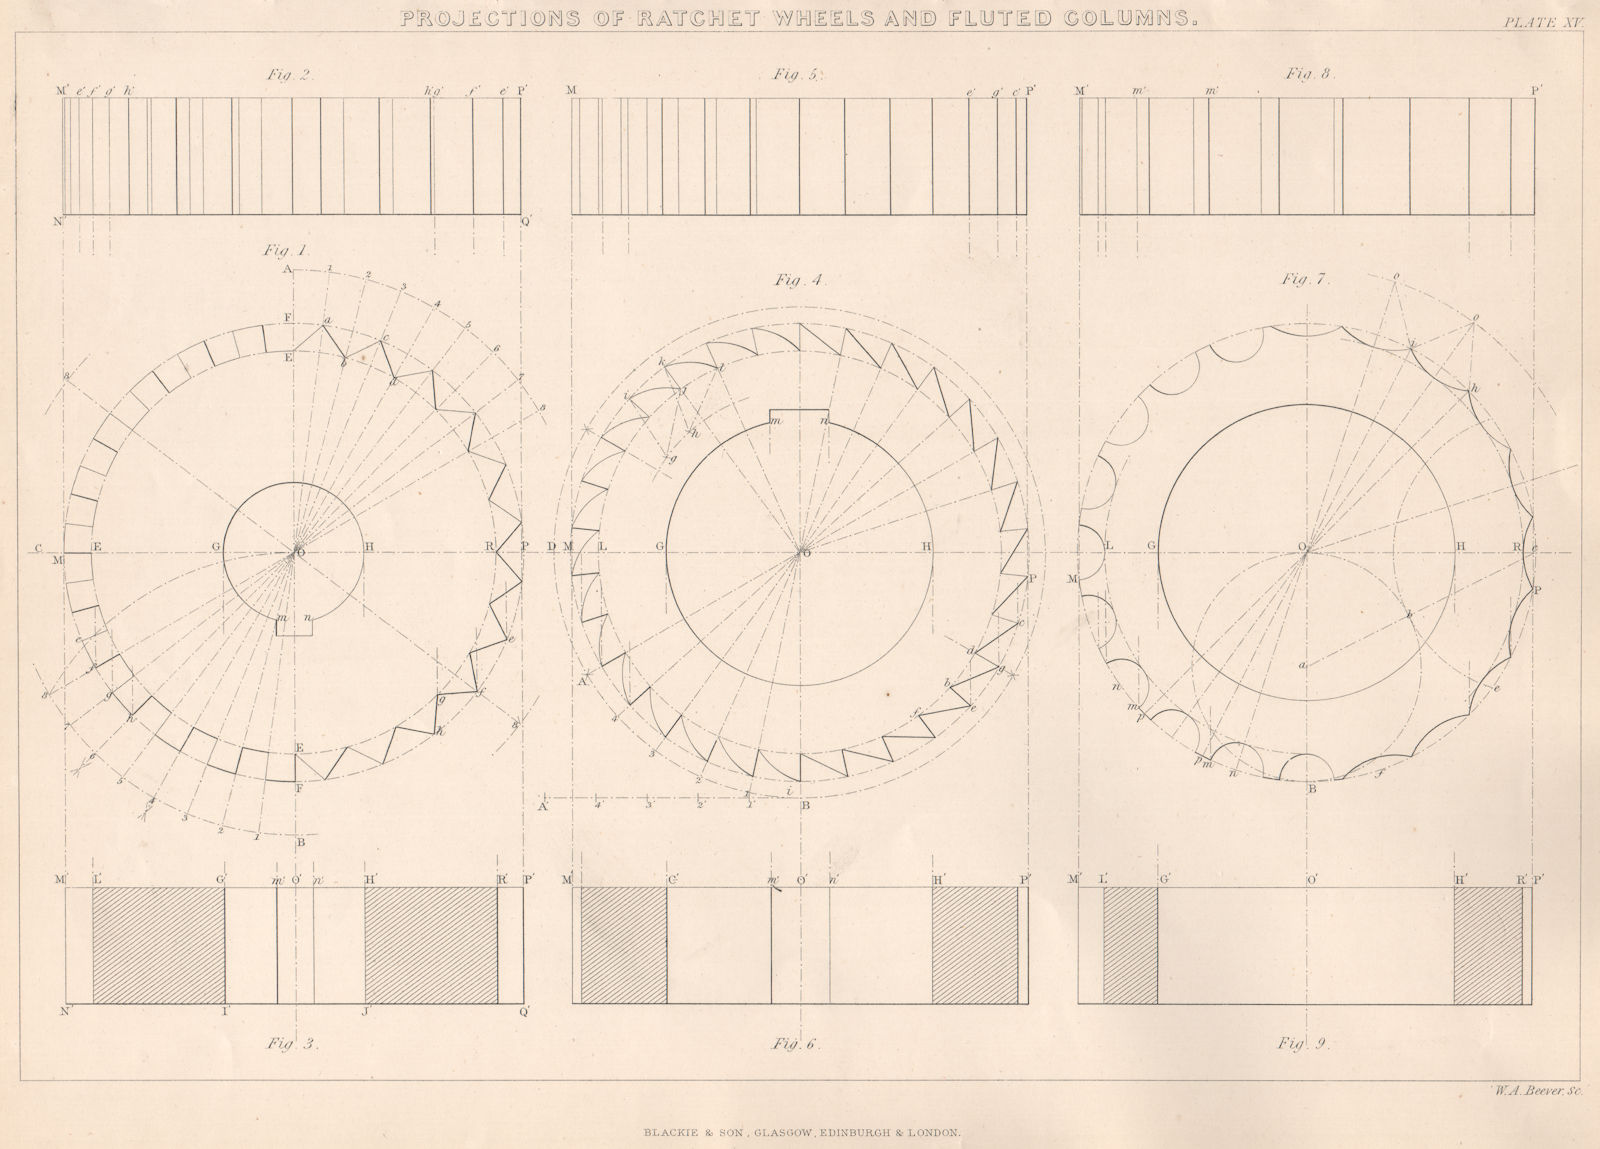 VICTORIAN ENGINEERING DRAWING. Ratchet wheels & fluted columns projections 1876